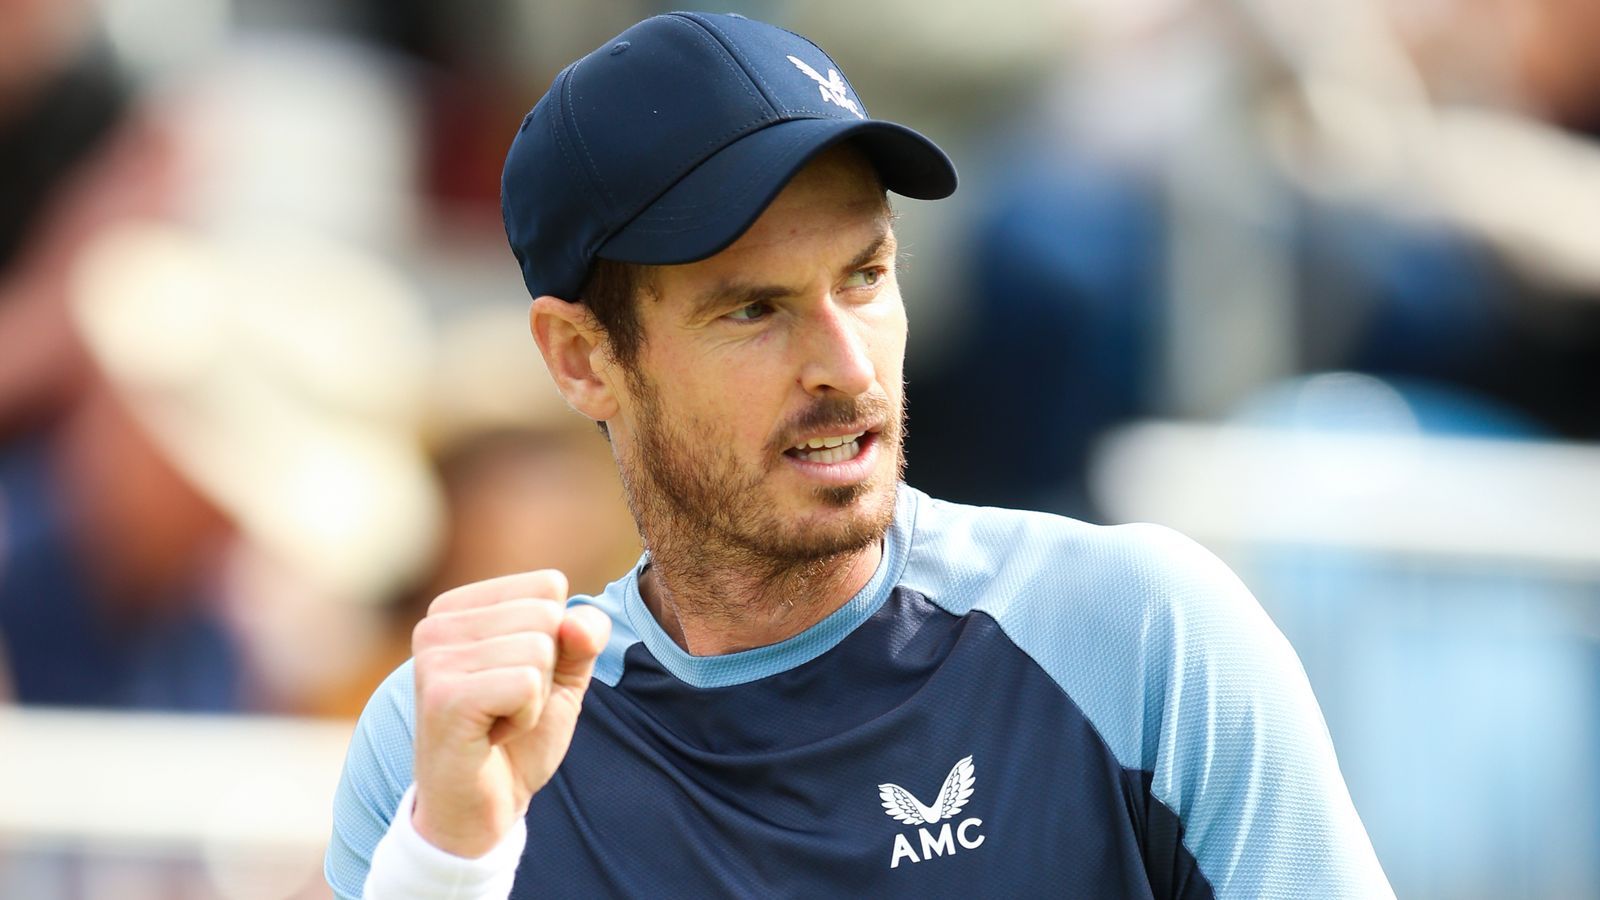 Andy Murray beats Christopher O’Connell in straight sets in first round of ATP event in Stuttgart